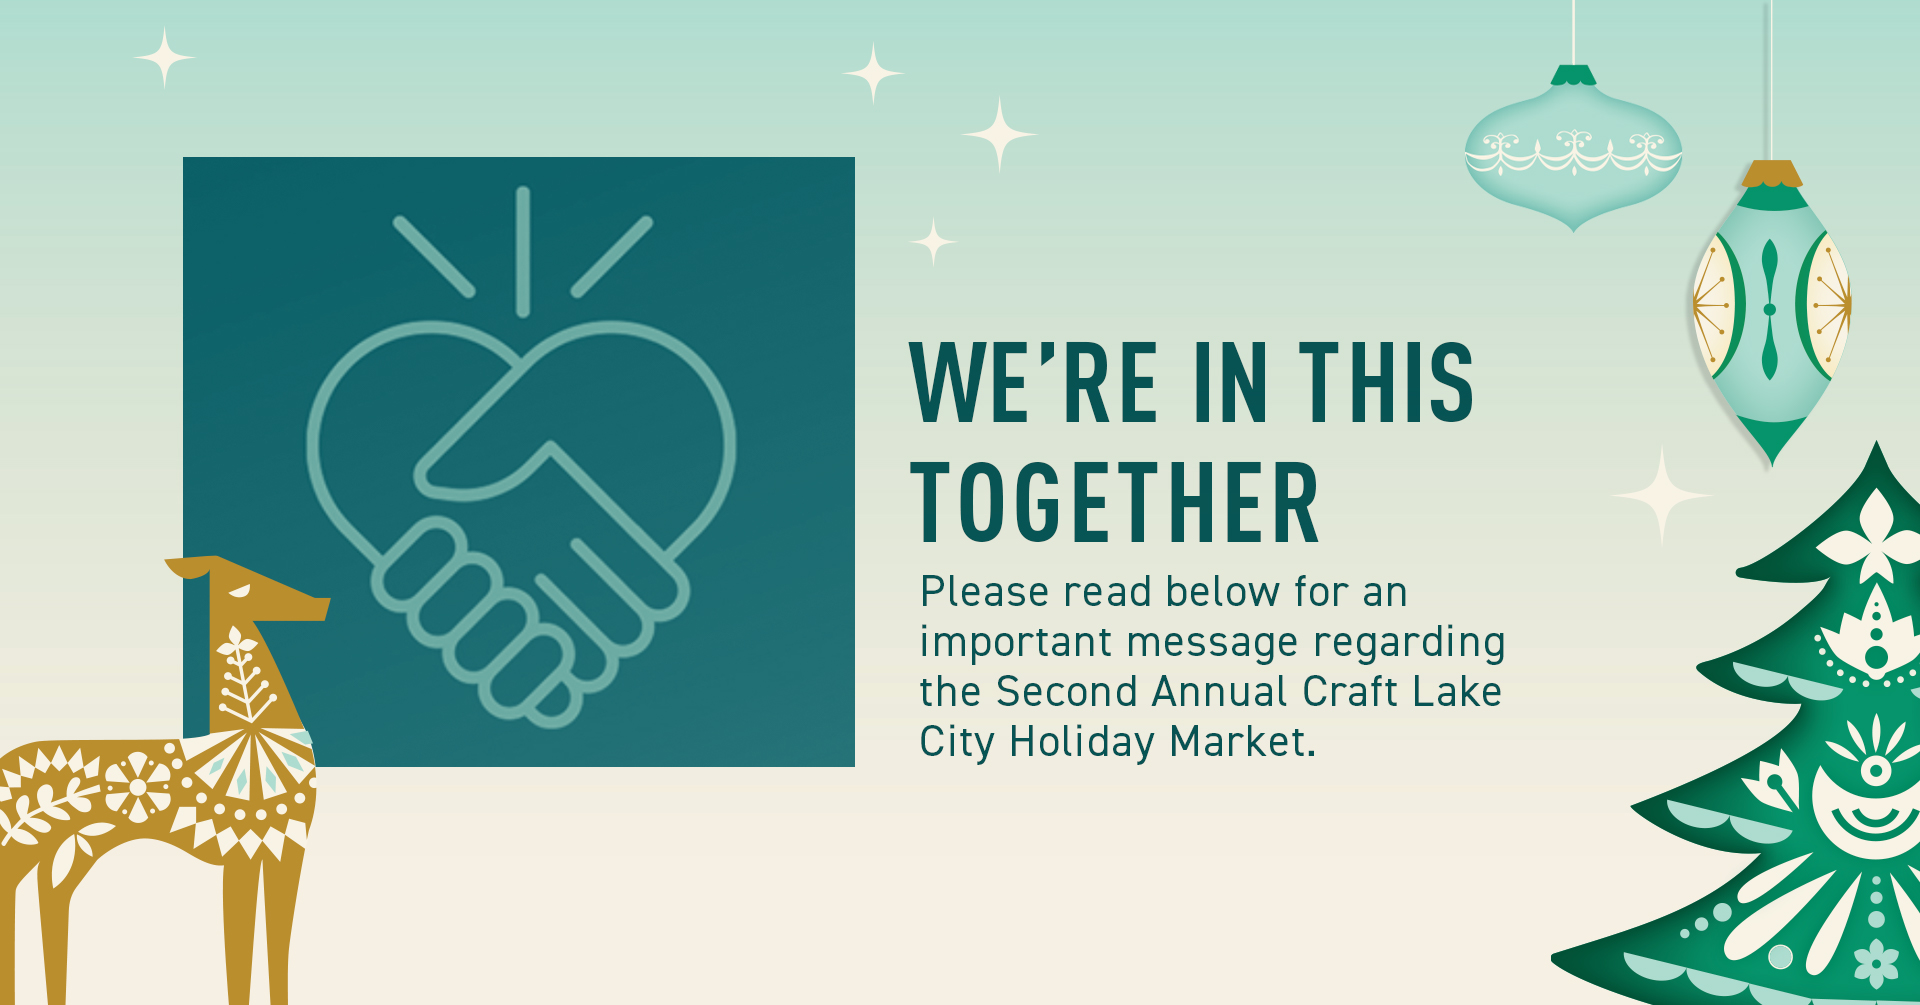 The Second Annual Craft Lake City Holiday Market is Moving Online!